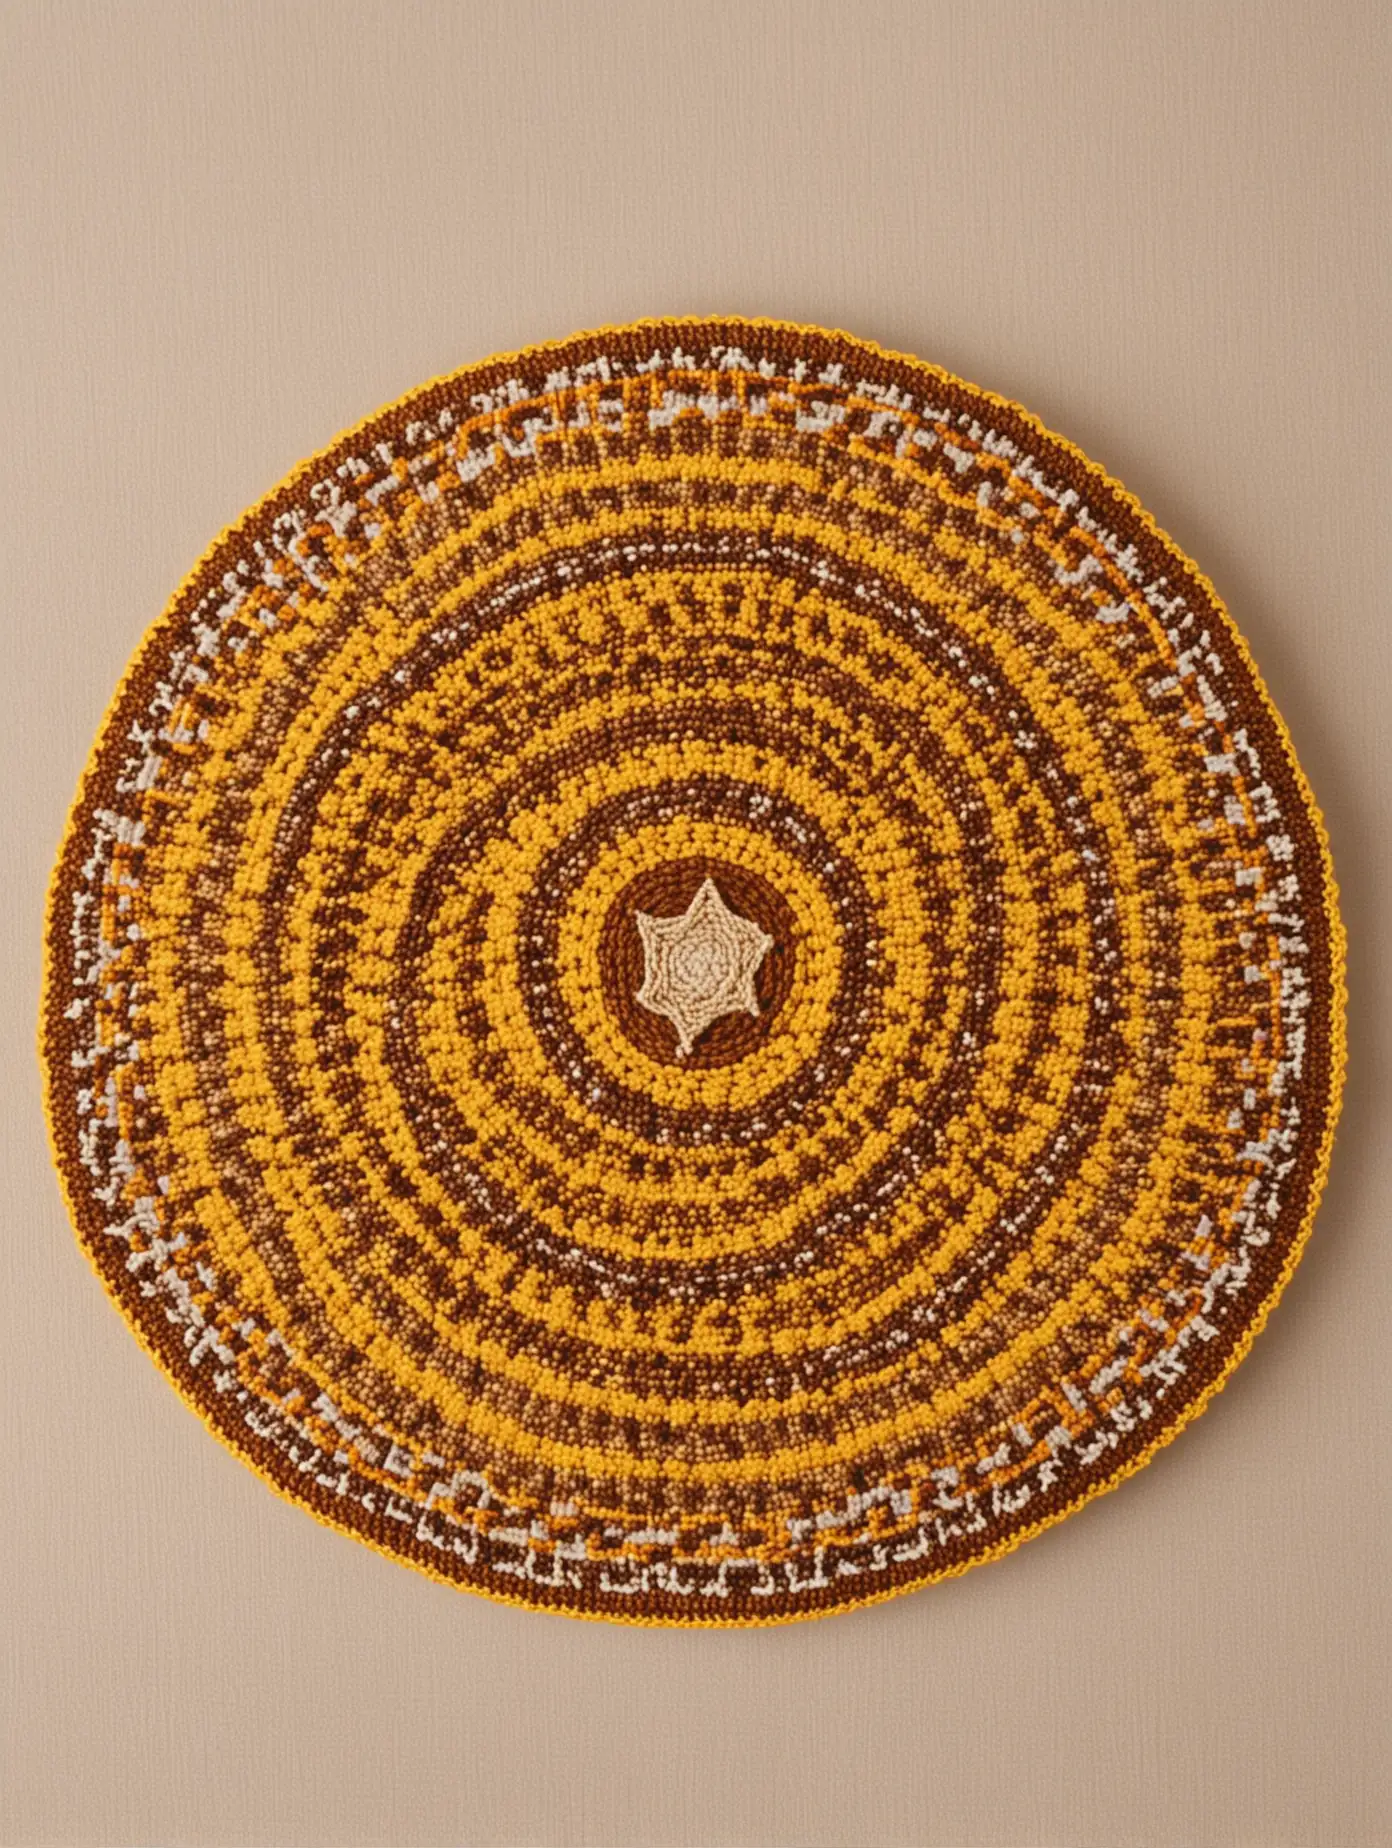 Israeli round knitted Kippah in yellow and brown colors and Jewish style decorations